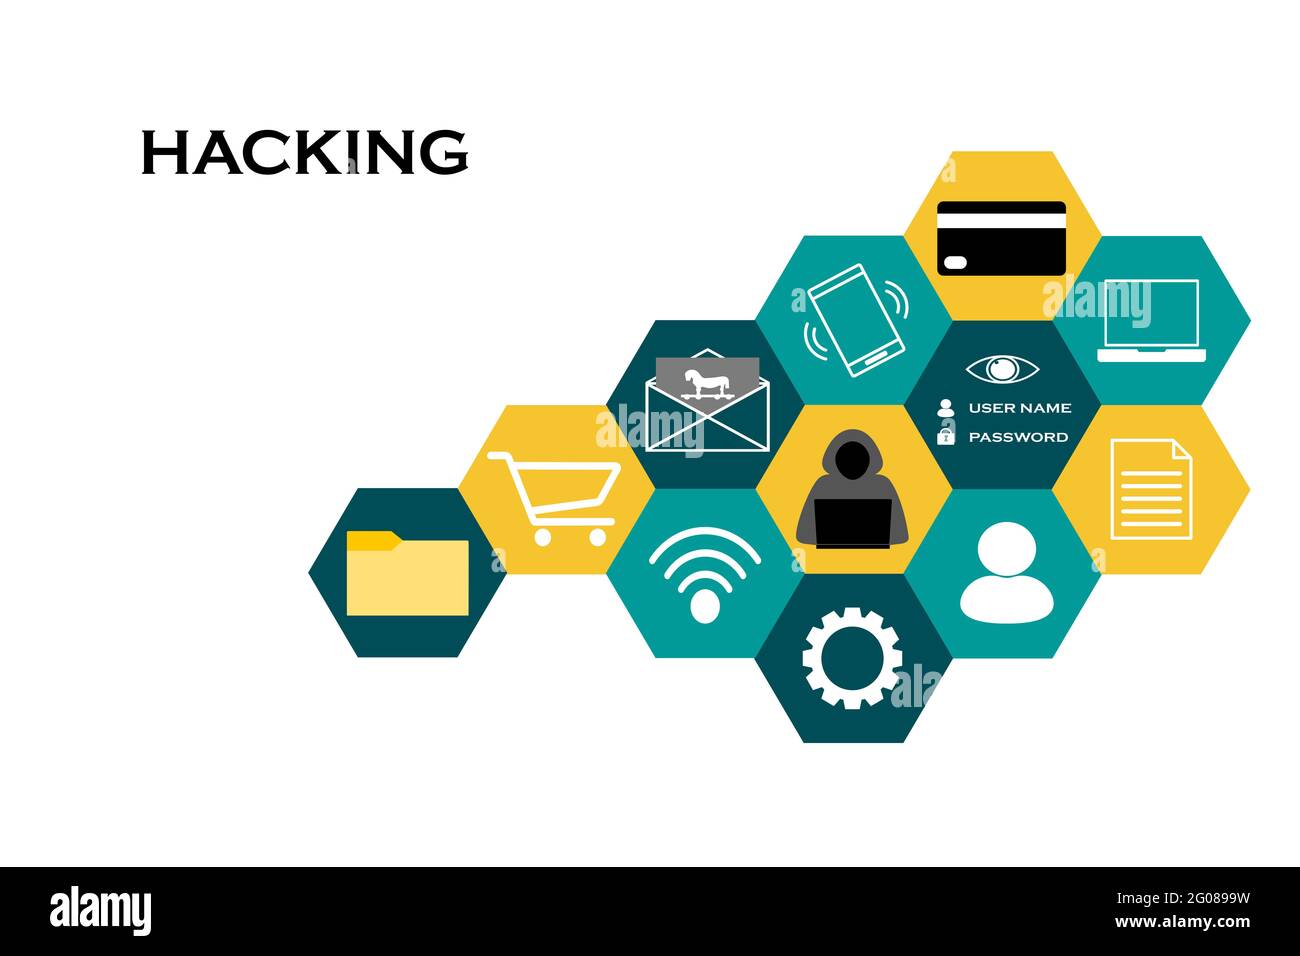 Hacking and information security concept. Hexagon collage of hacking actors, means and data and assets at risk. Stock Photo